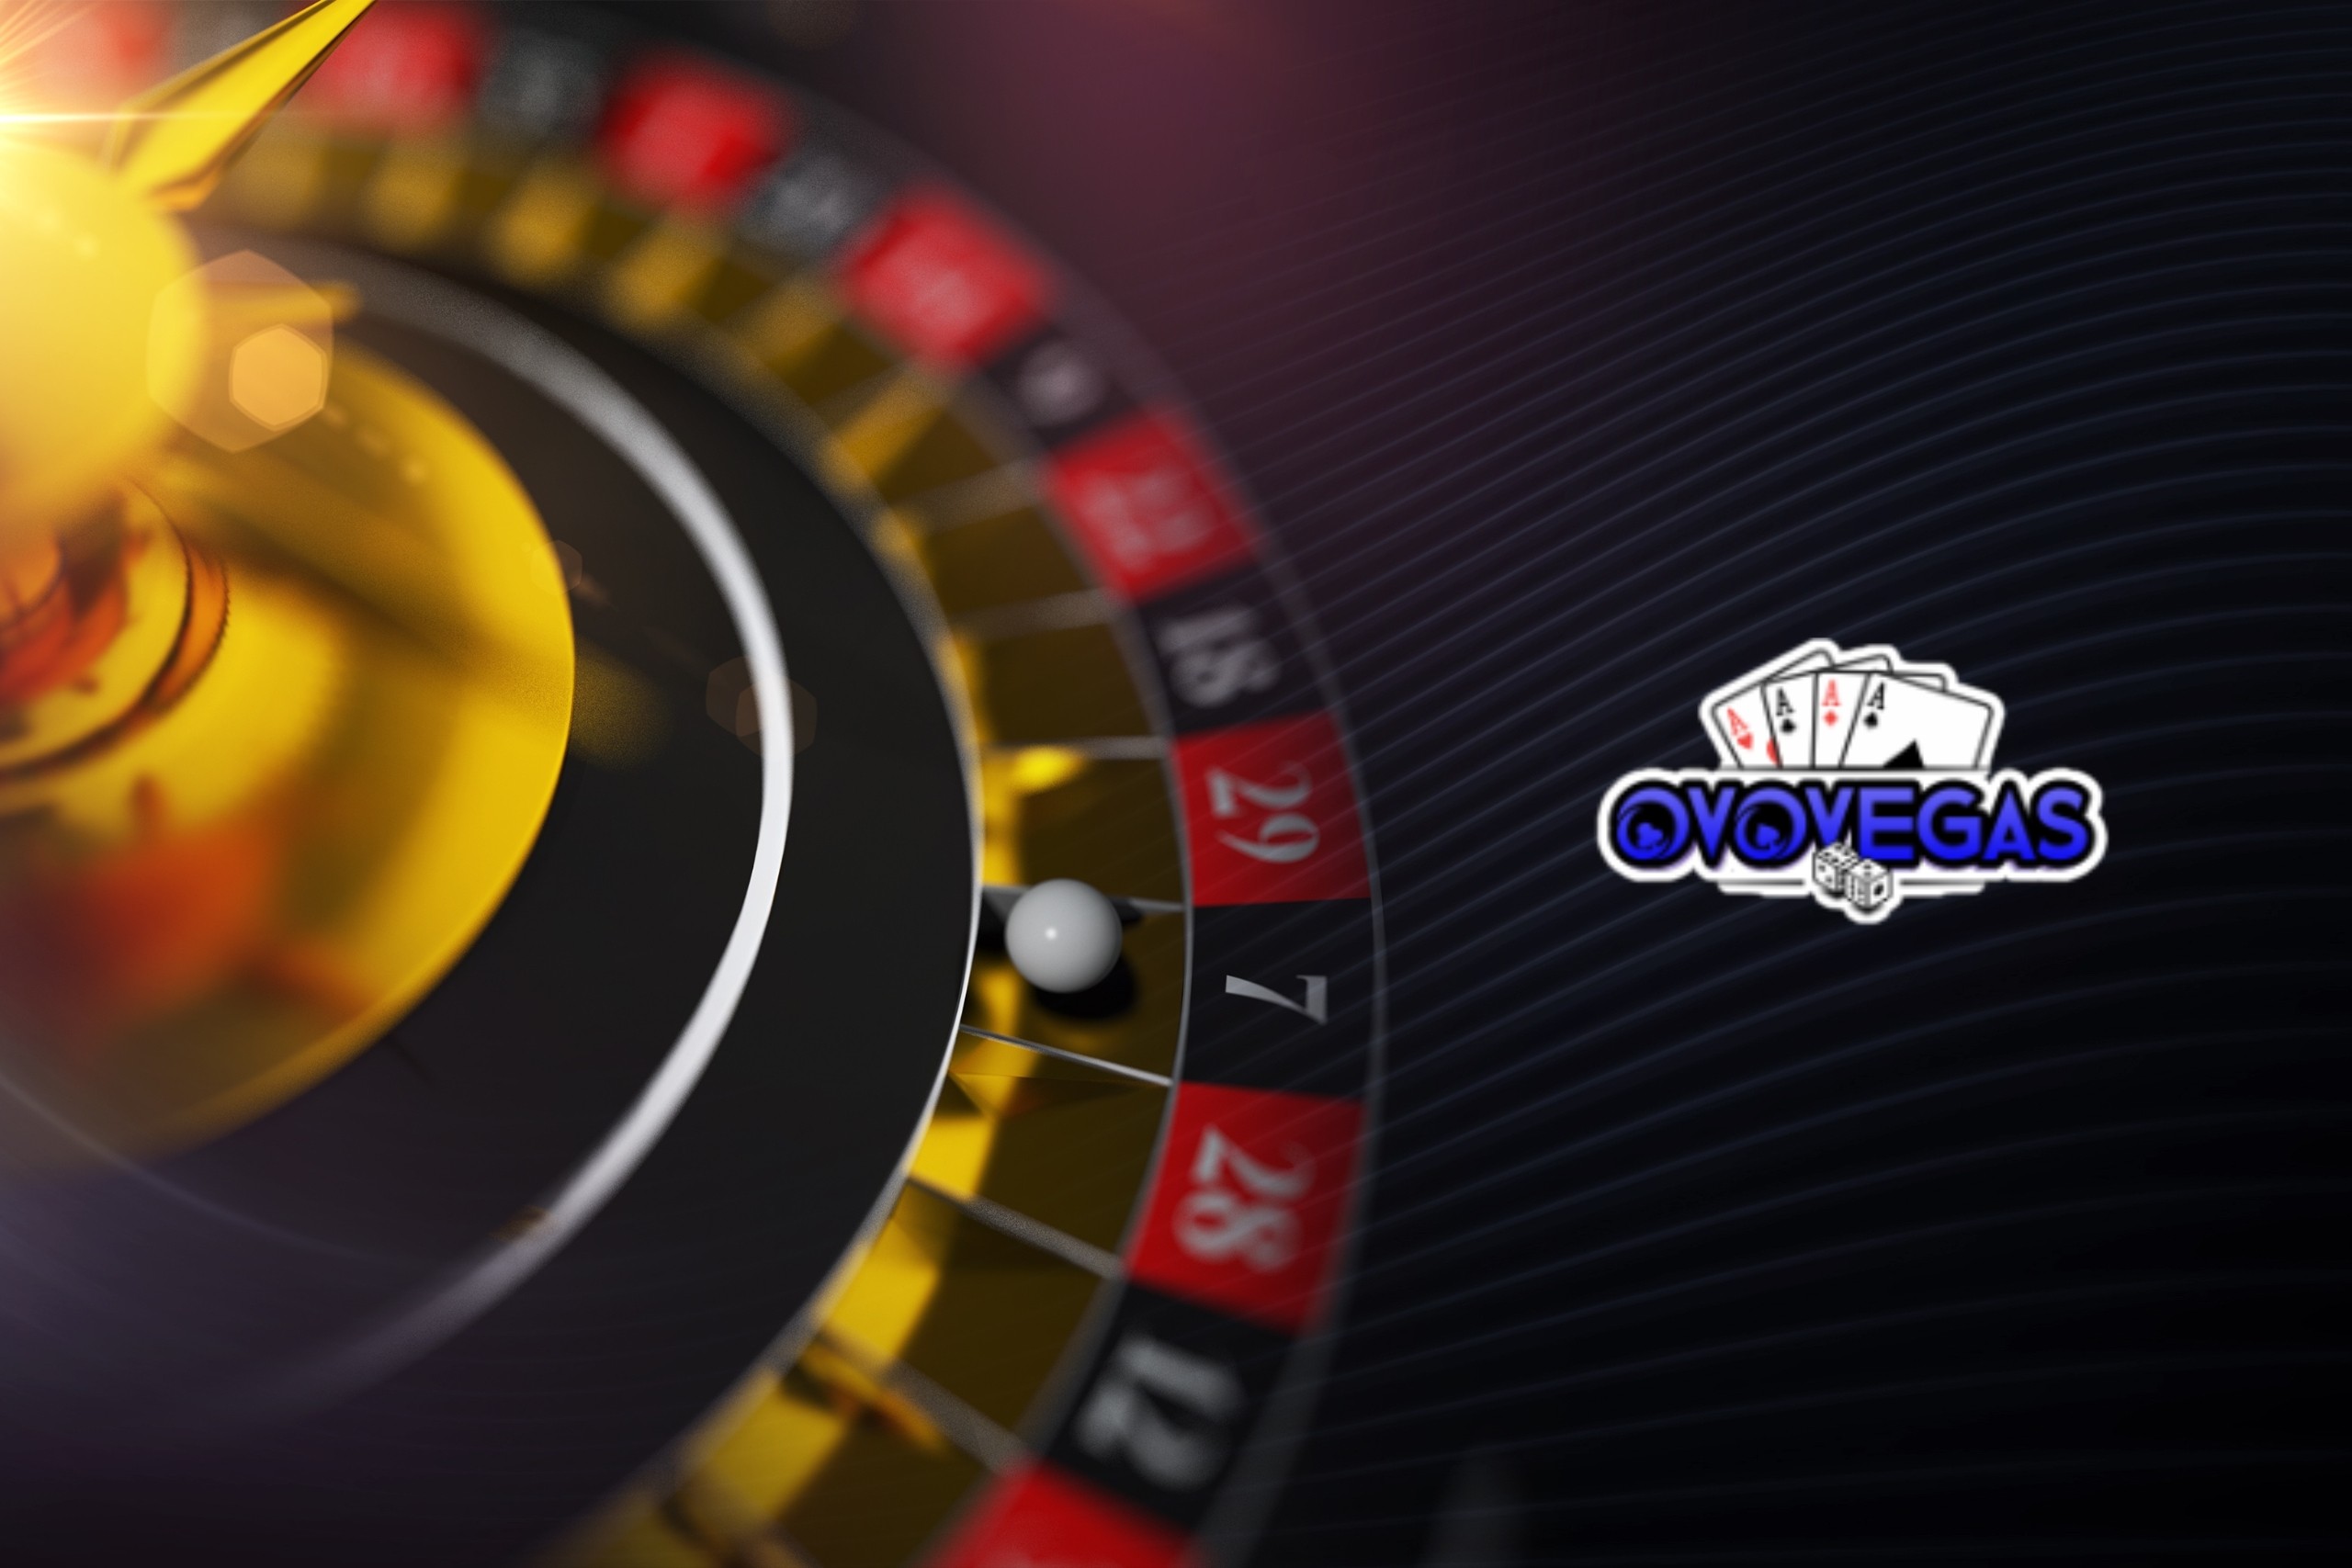 Get Ready For Non-Stop Entertainment At Ovovegas Slot Casino